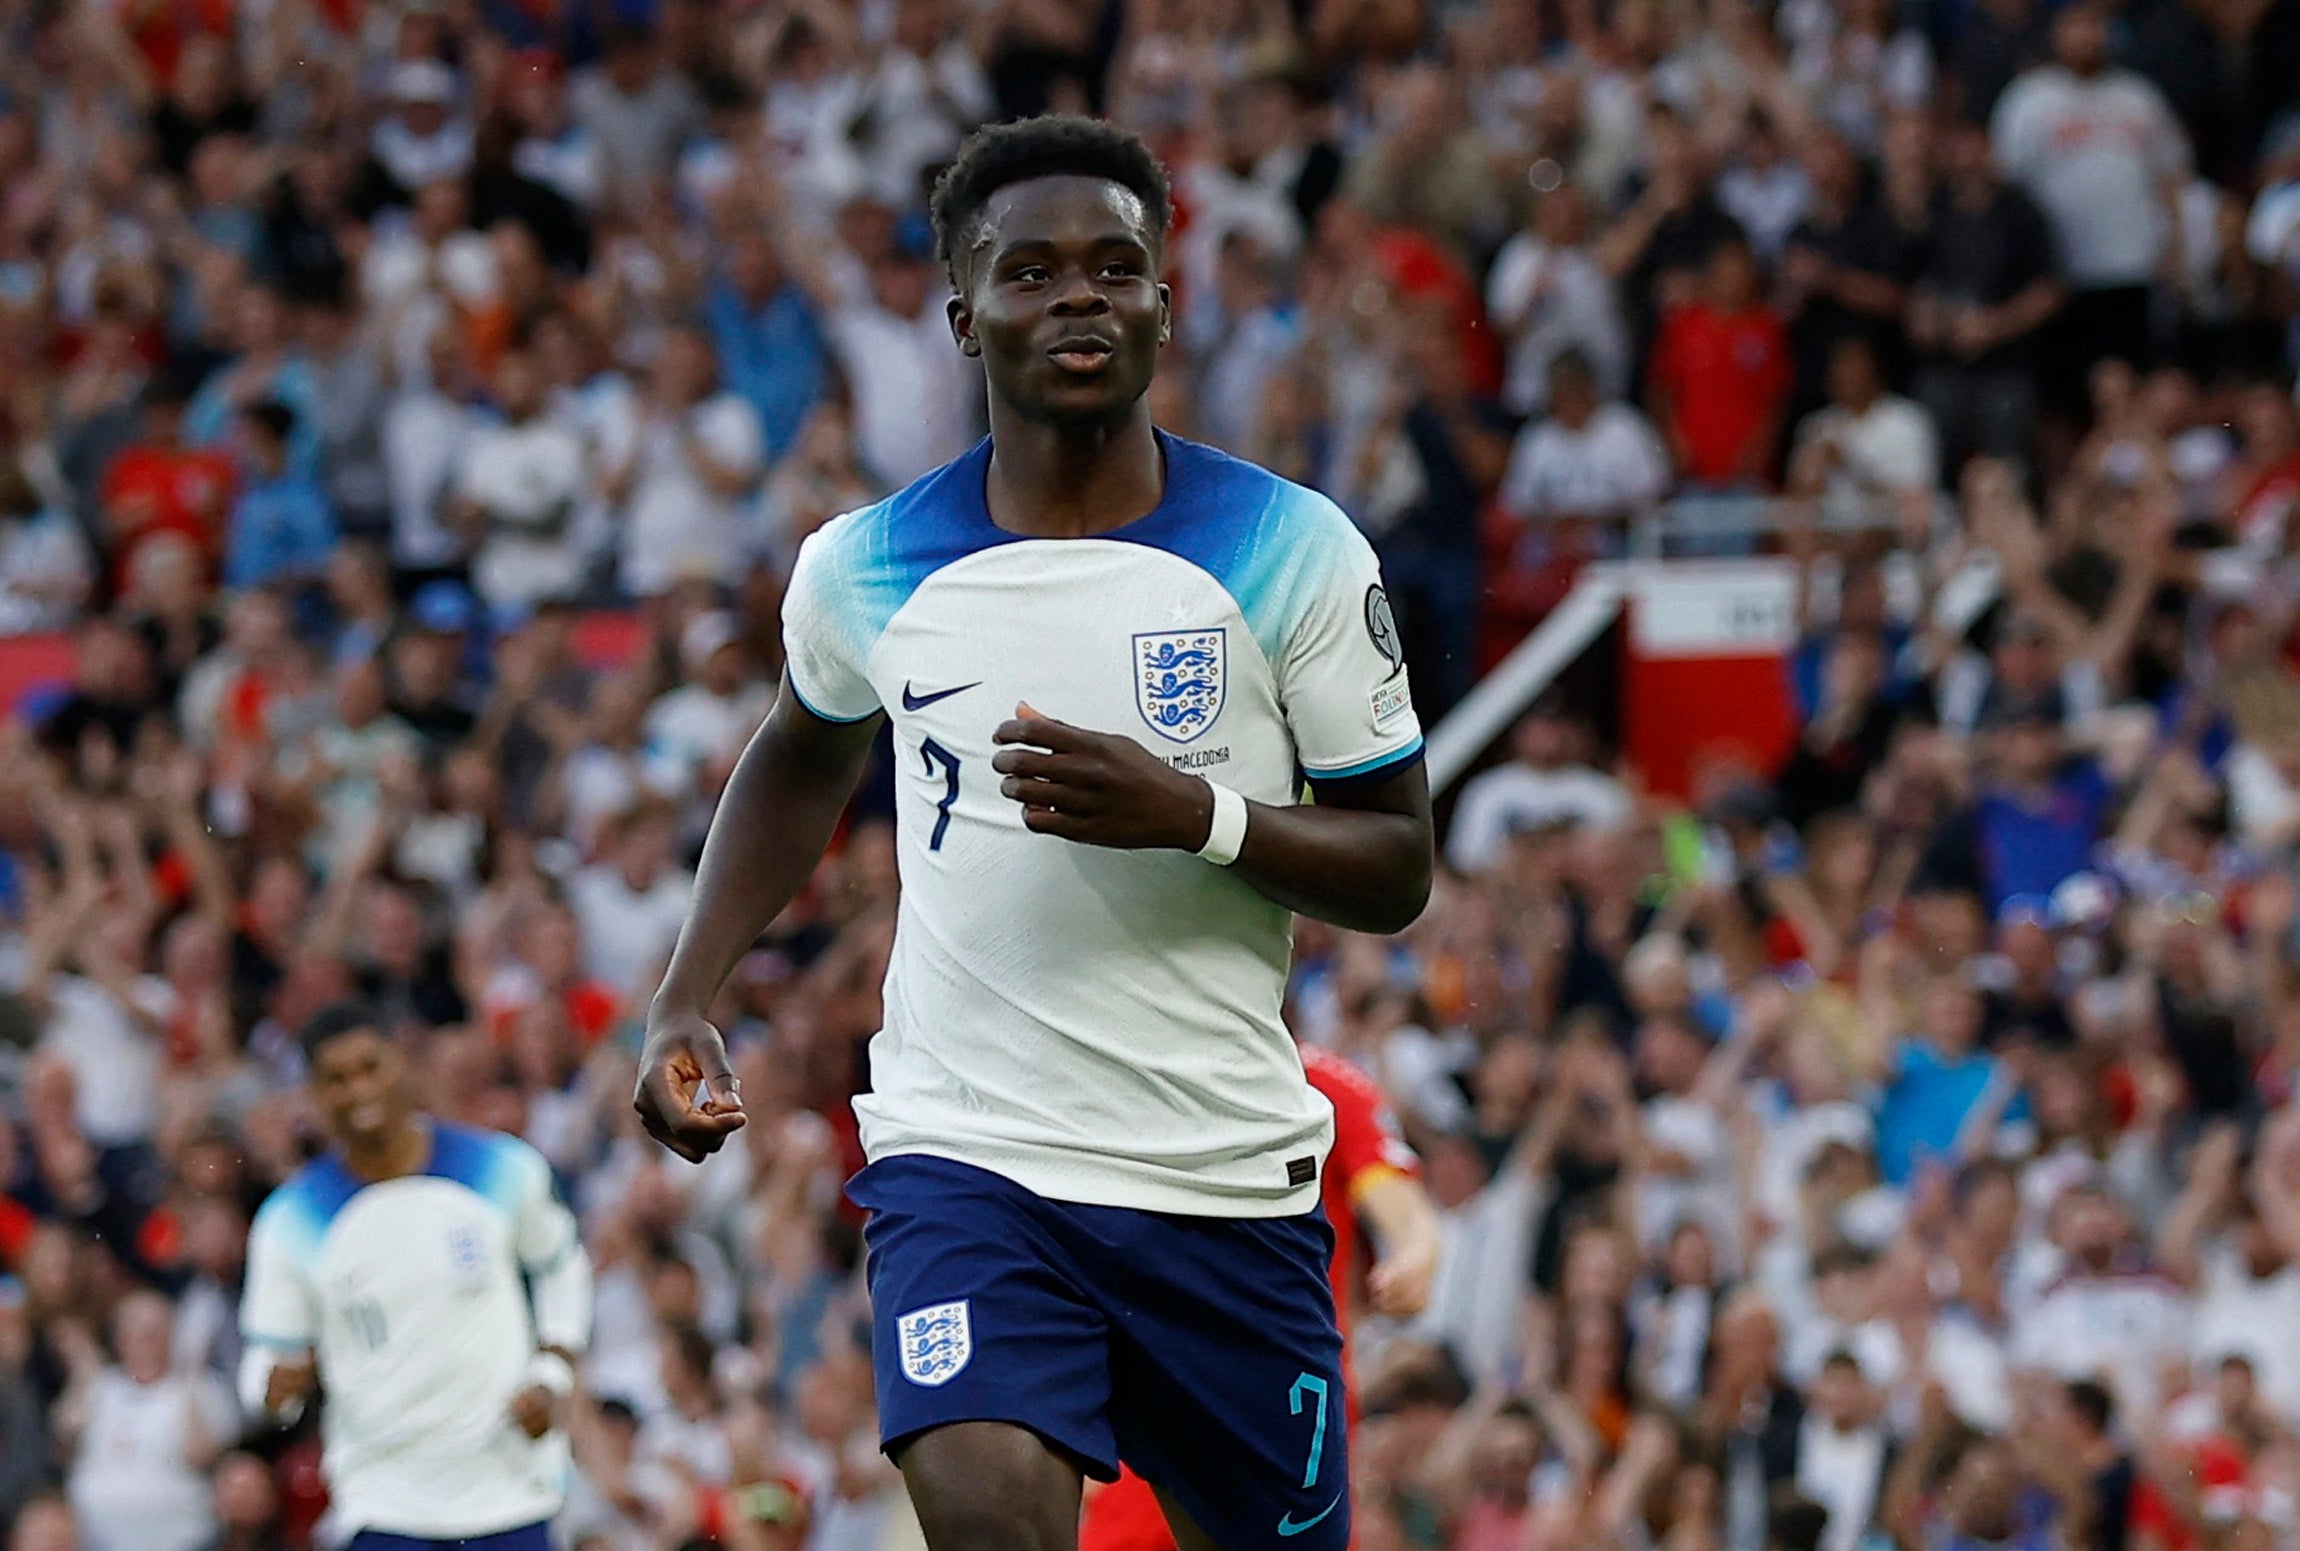 Bukayo Saka cements his place as England’s next leading man with first